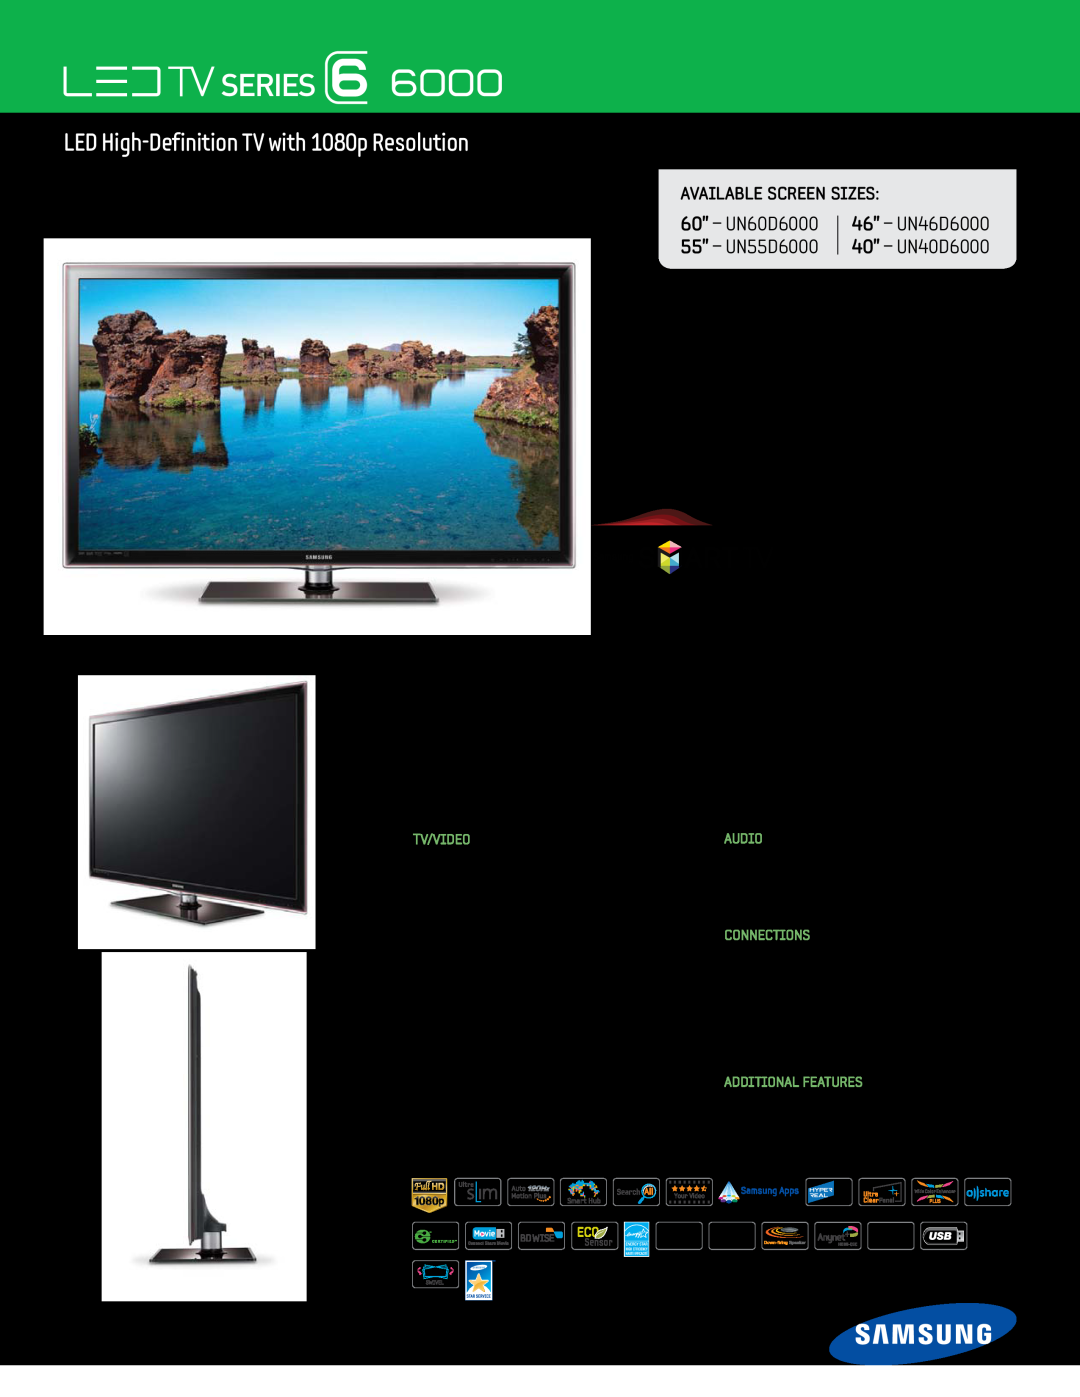 Samsung manual LED High-Definition TV with 1080p Resolution, Available Screen Sizes, 60” - UN60D6000 55” - UN55D6000 